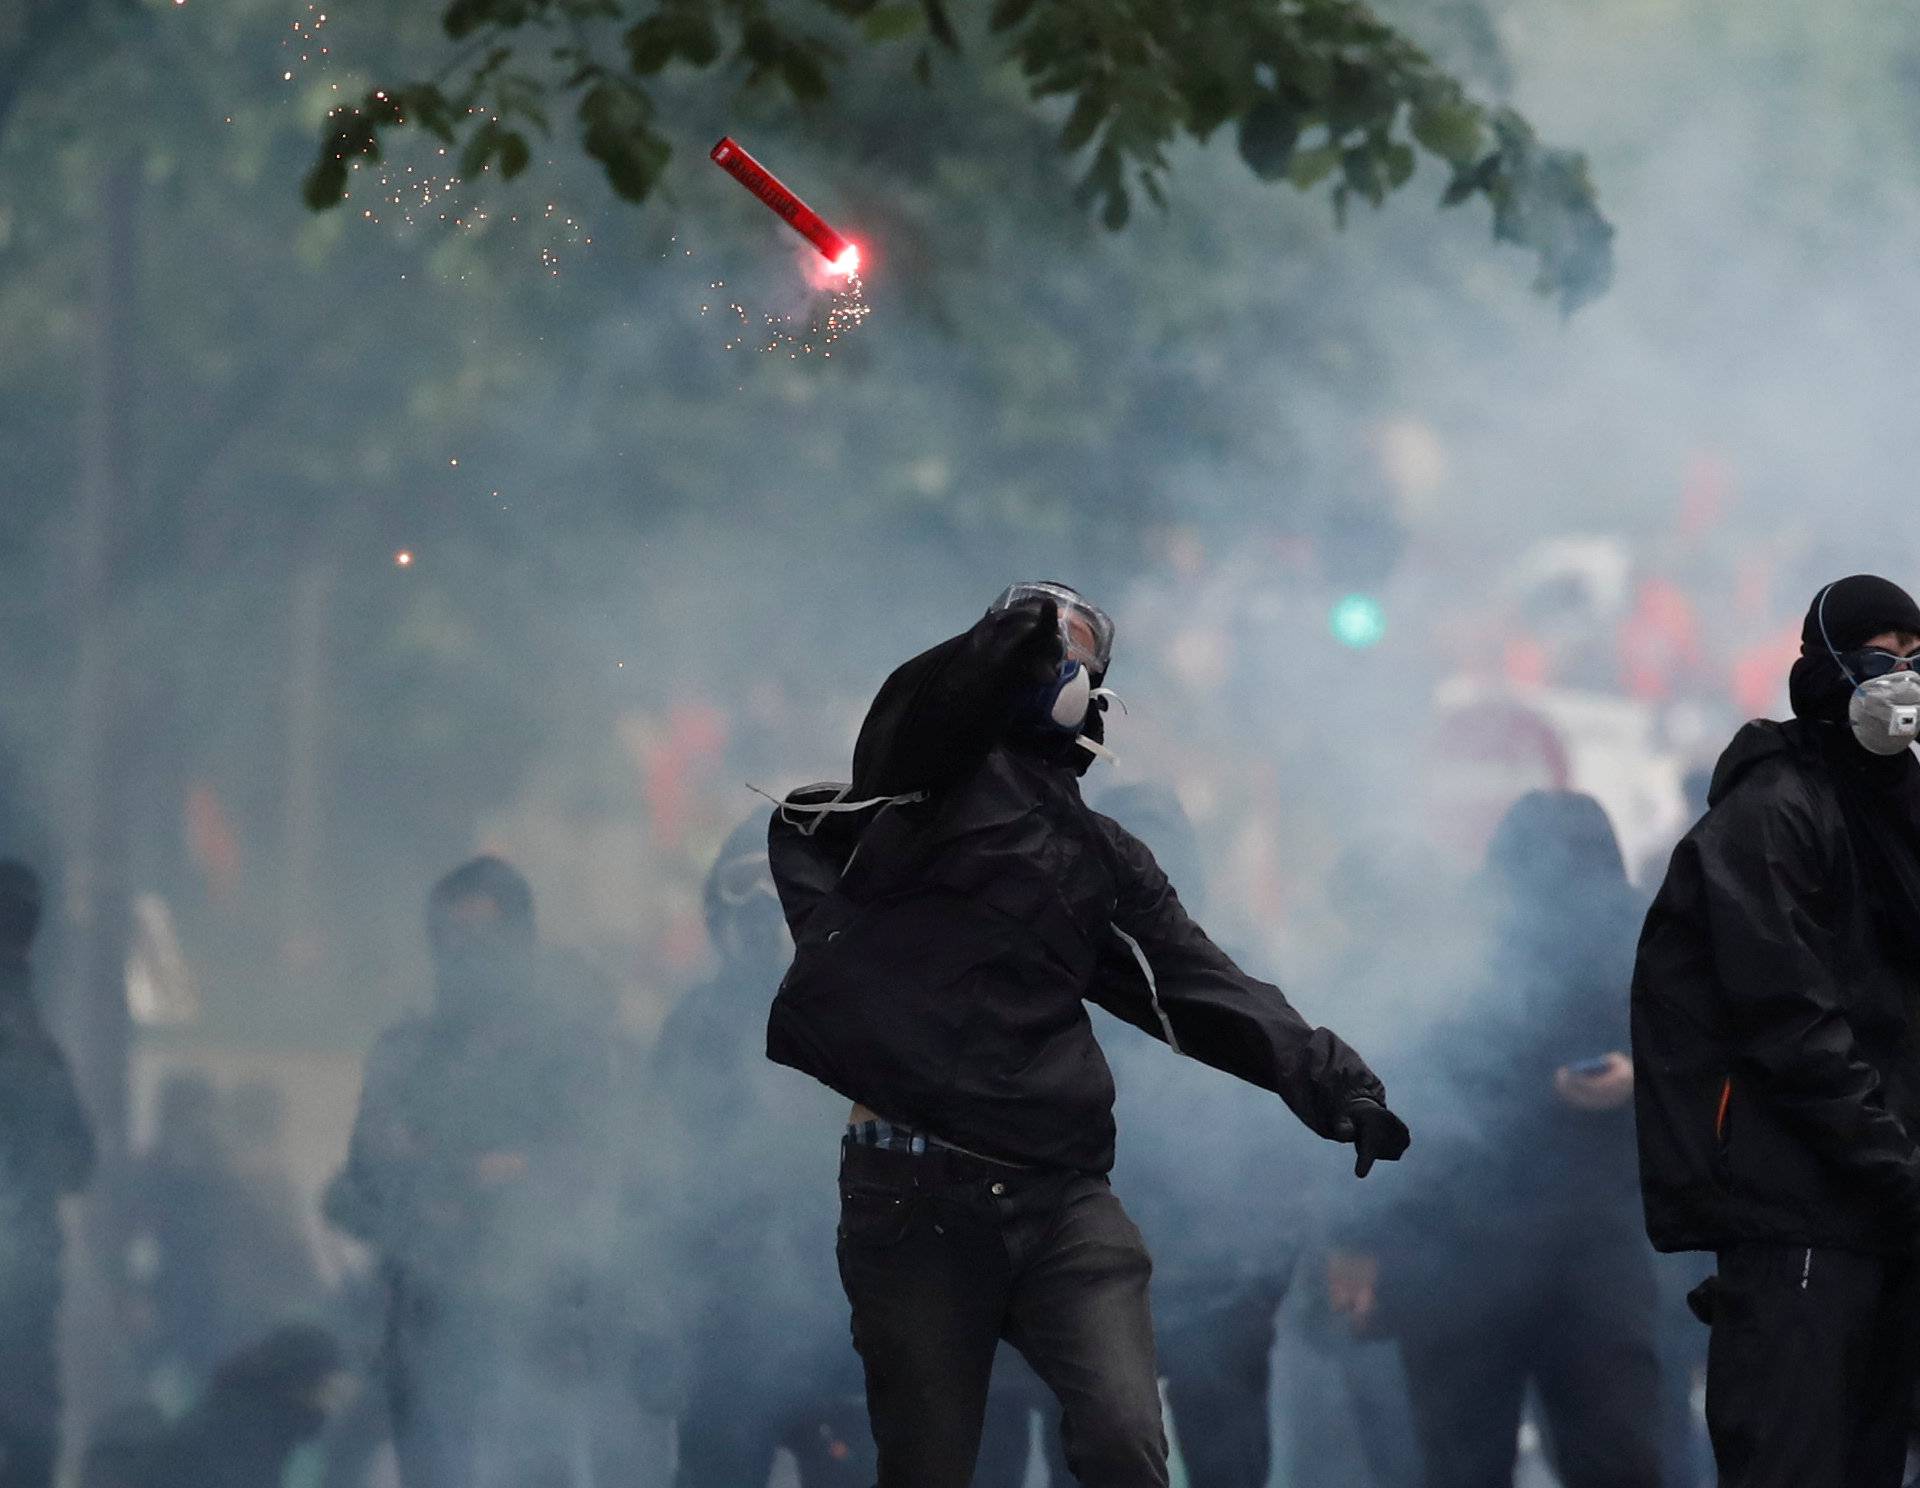 A protester throws a safety flare during clashes with French riot police at the May Day labour union rally in Paris